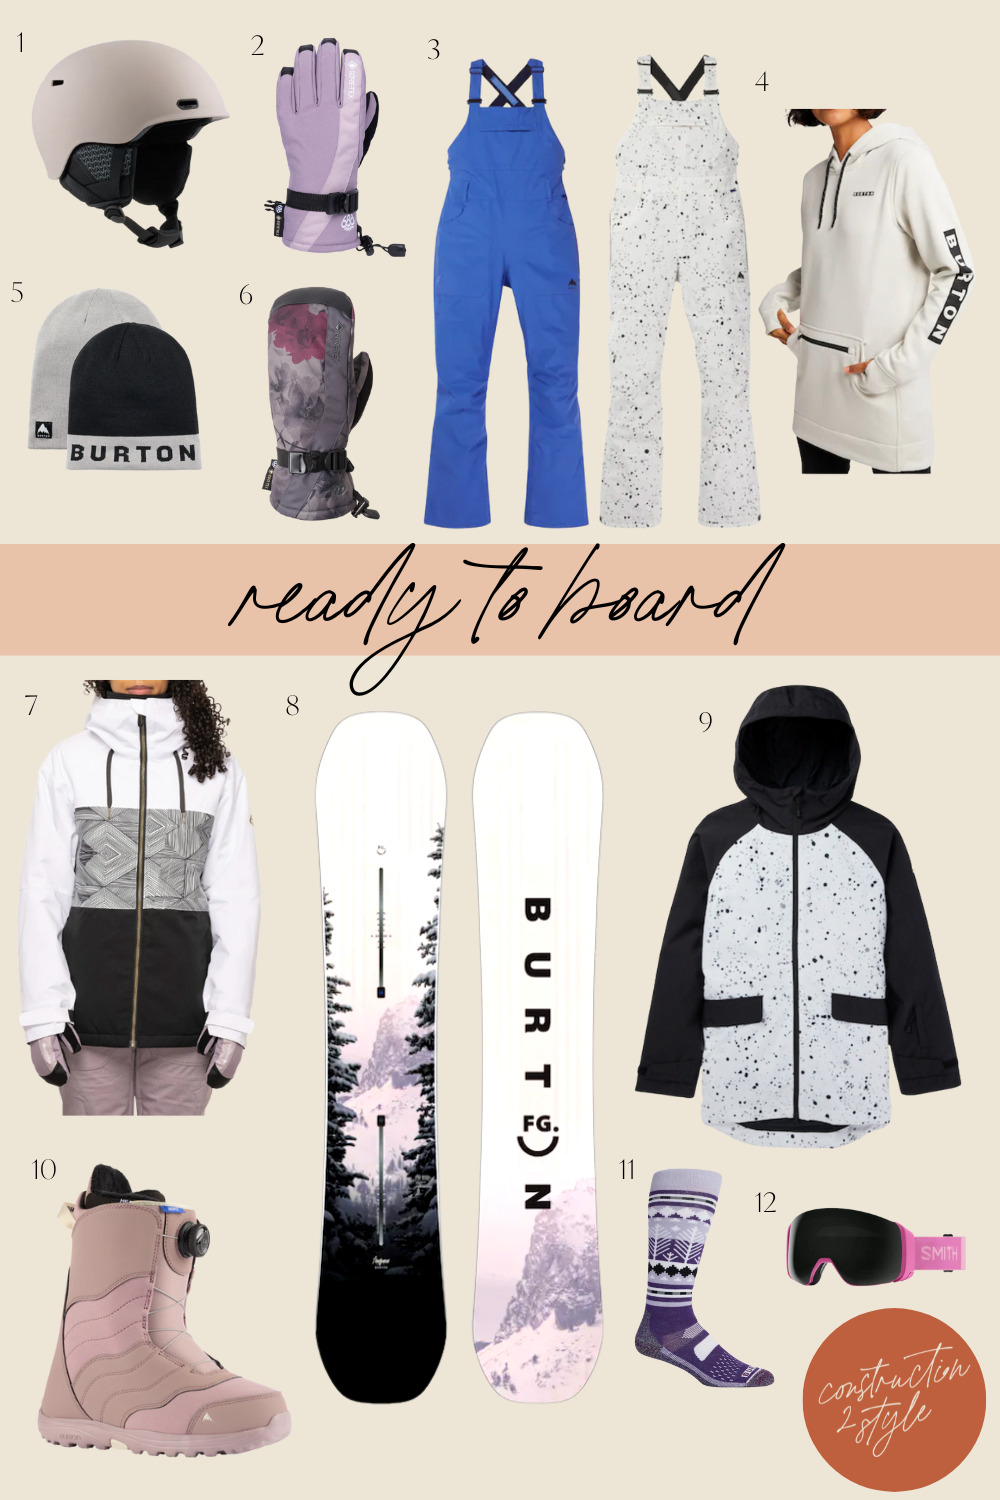 Beach Vacation or Mountain Getaway? Travel Destination and Outfit Ideas 6